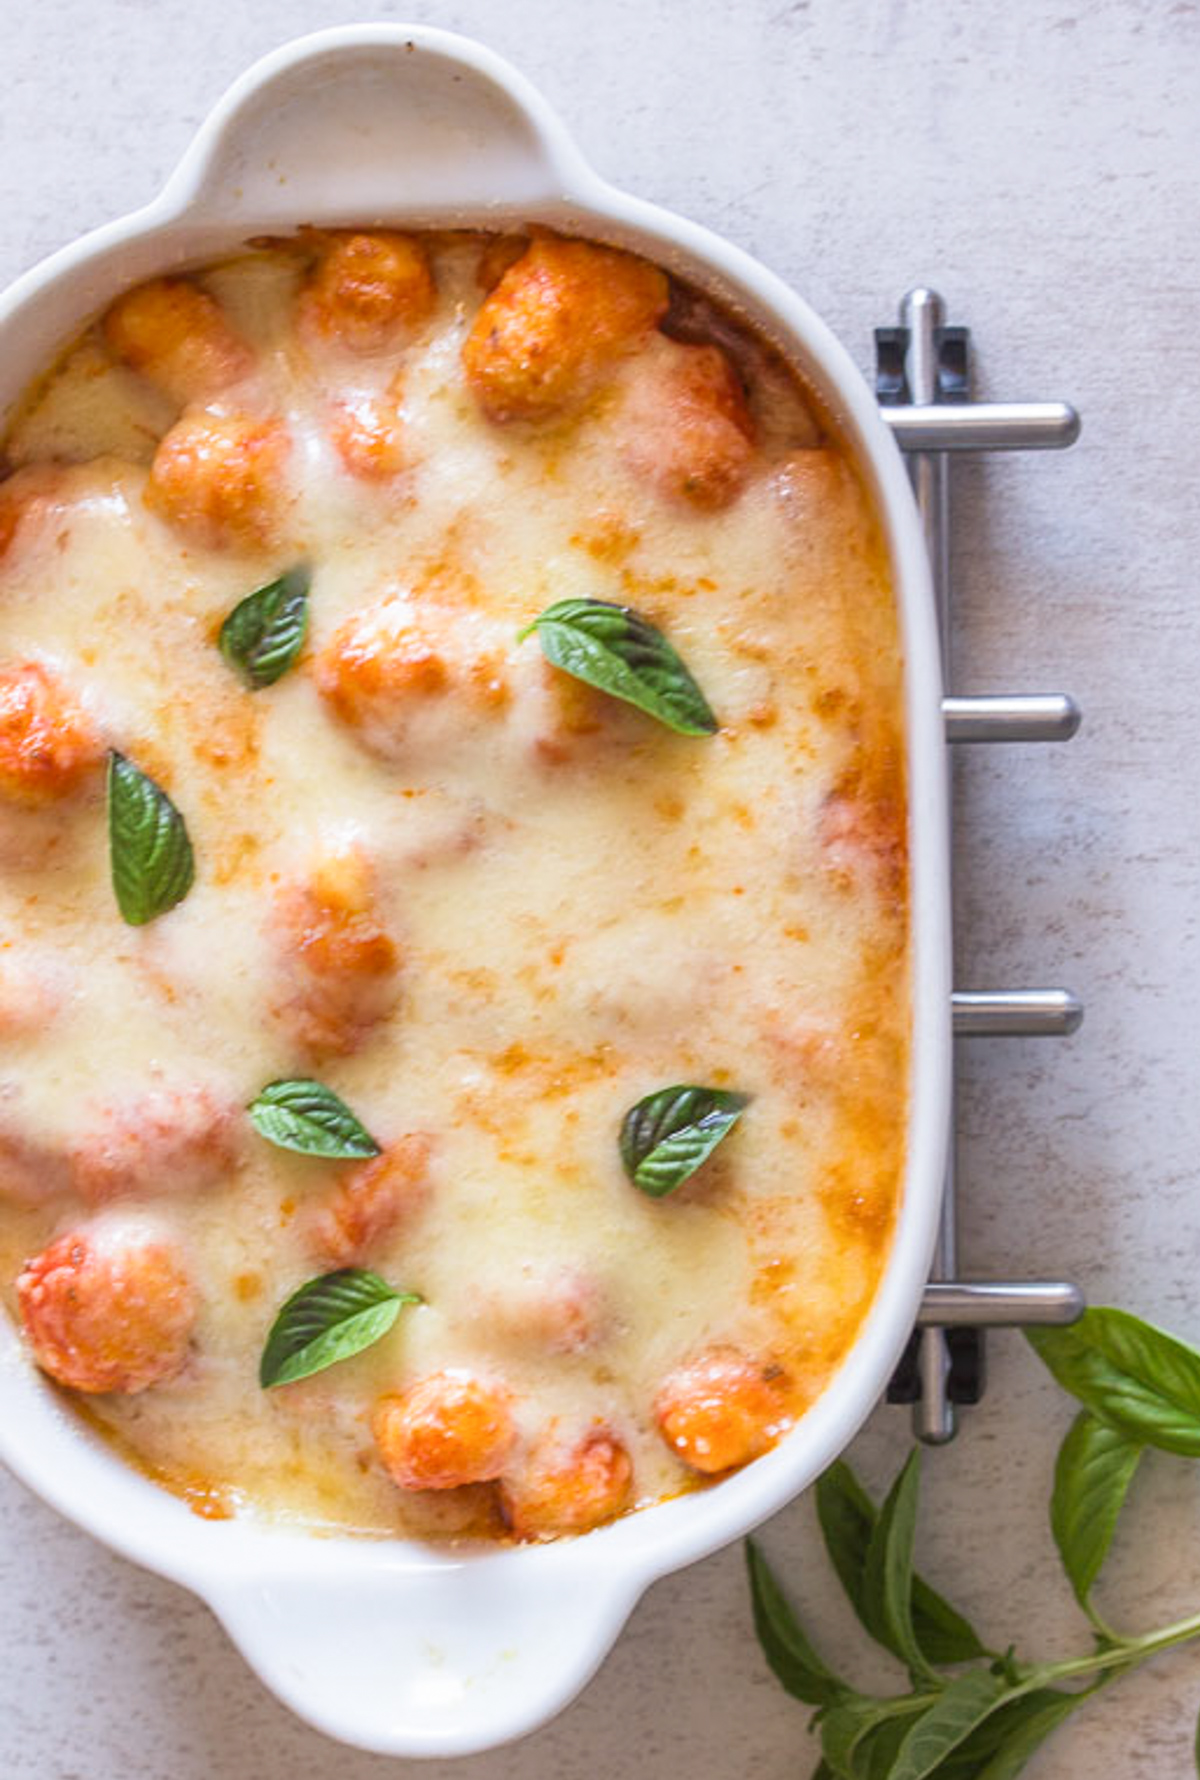 Baked gnocchi in a white dish.